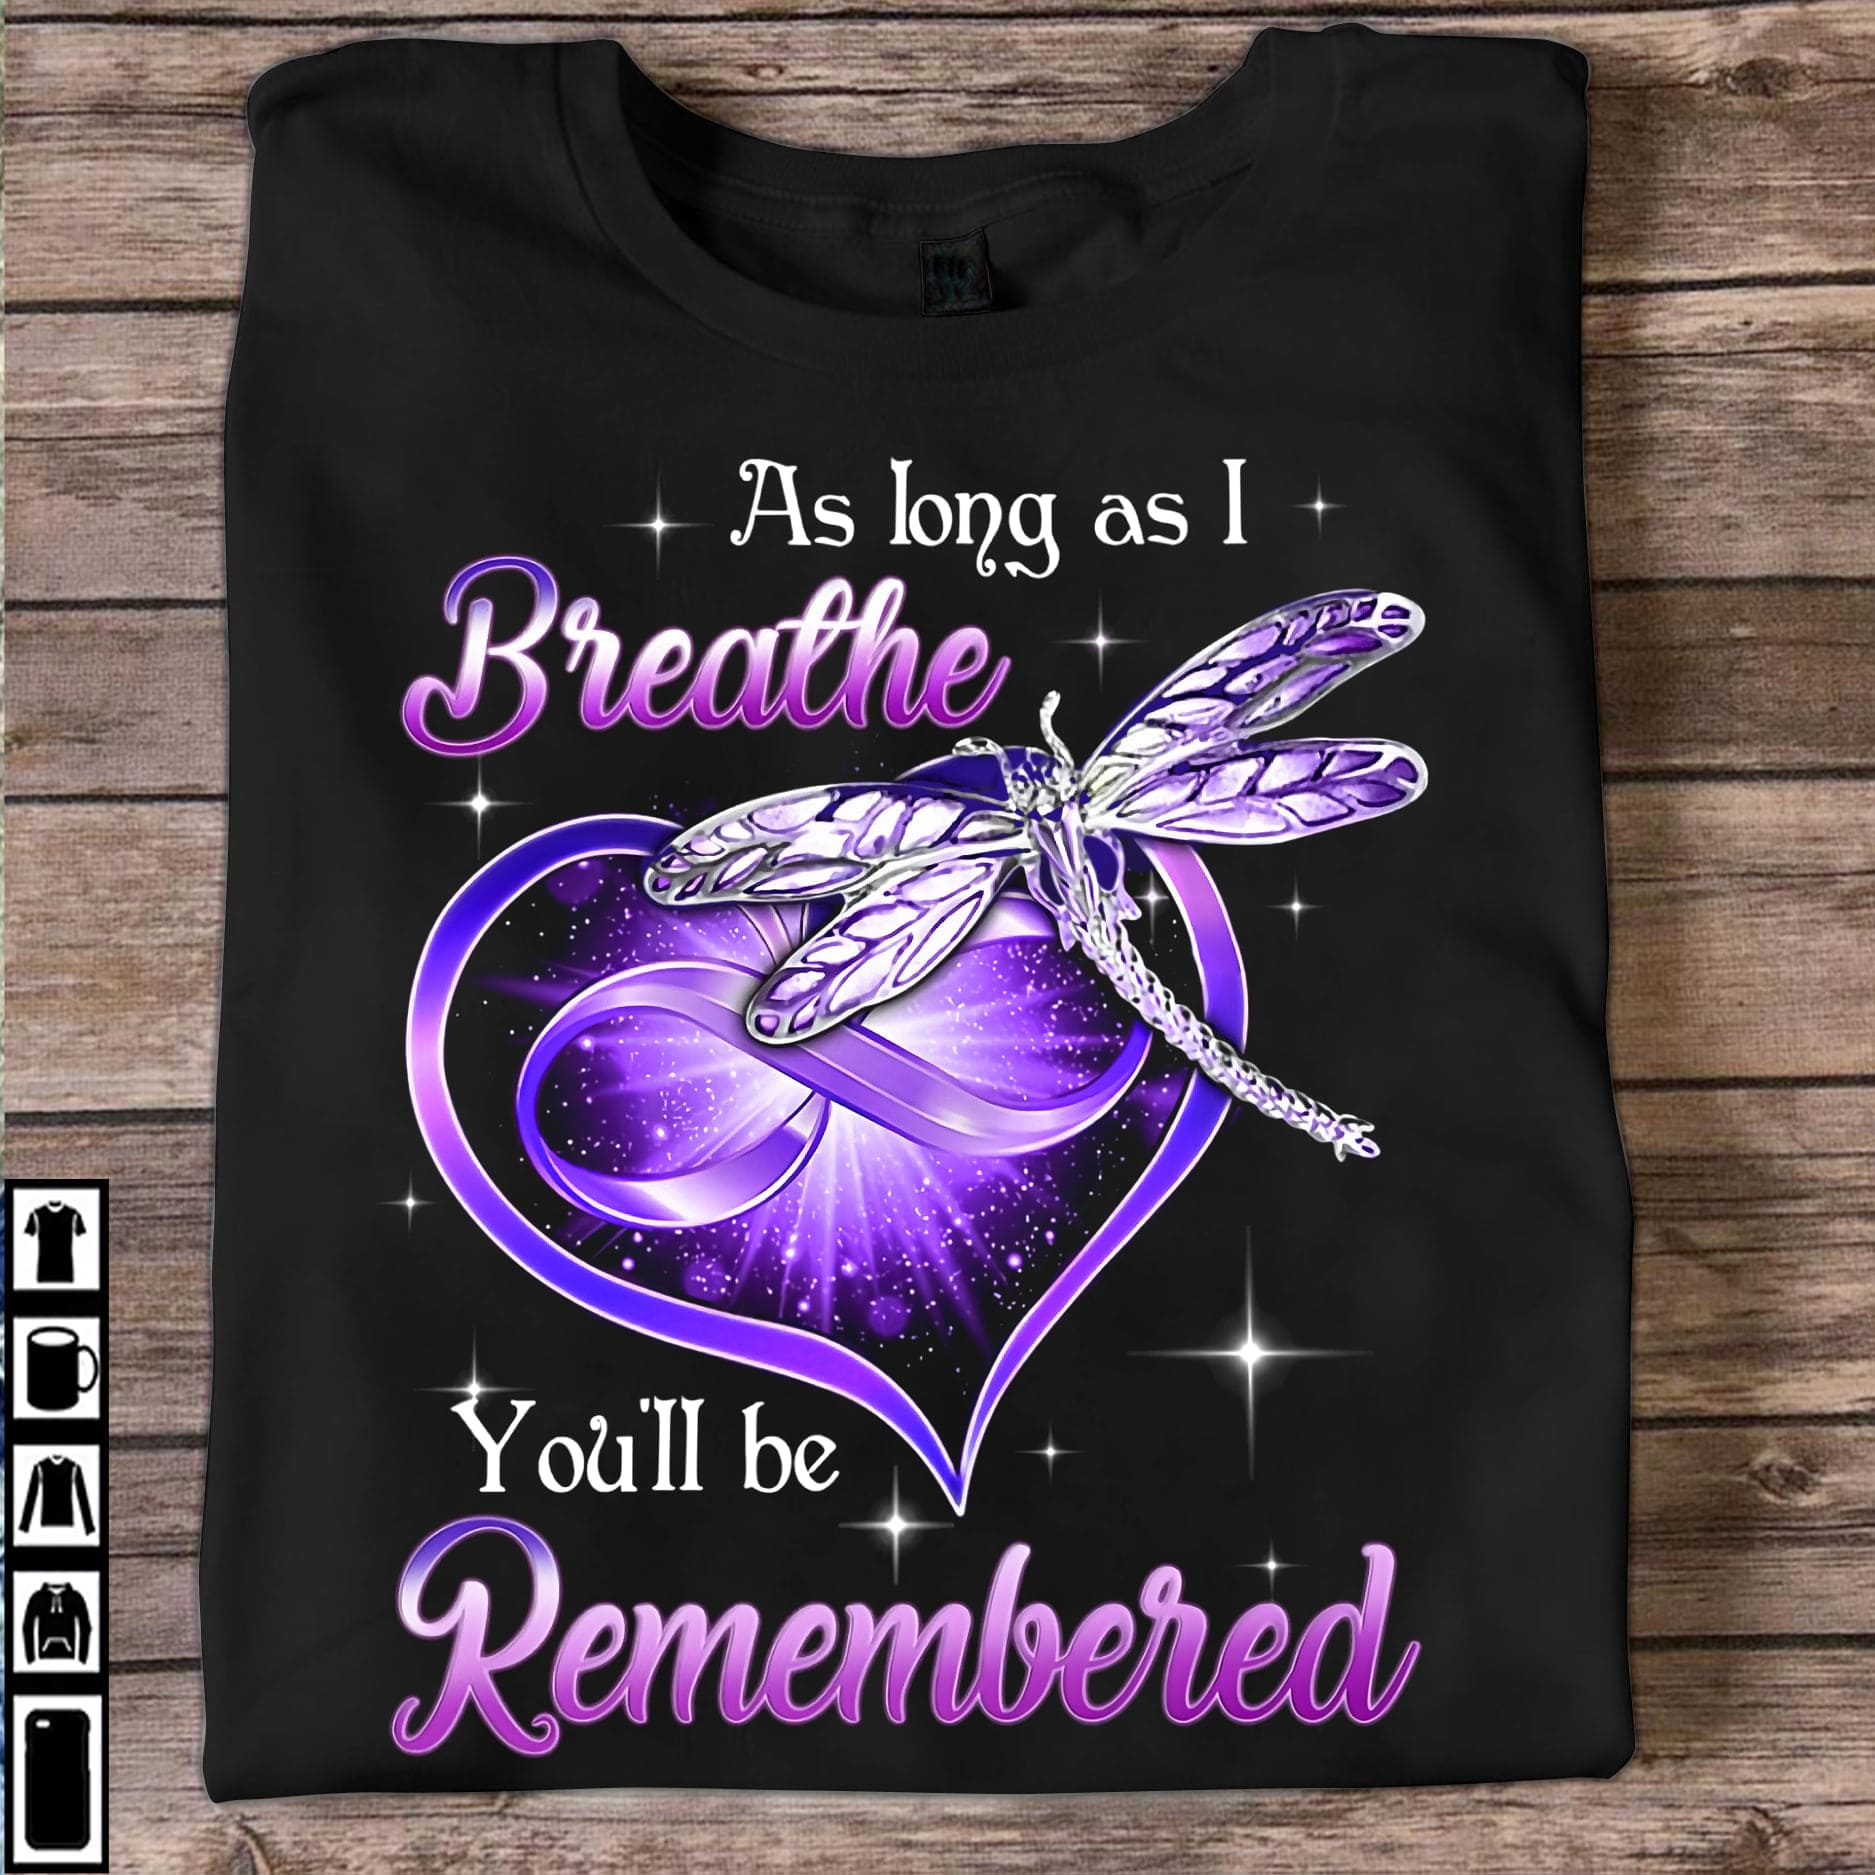 As long as I breathe you'll be remembered - Dragonfly T-shirt